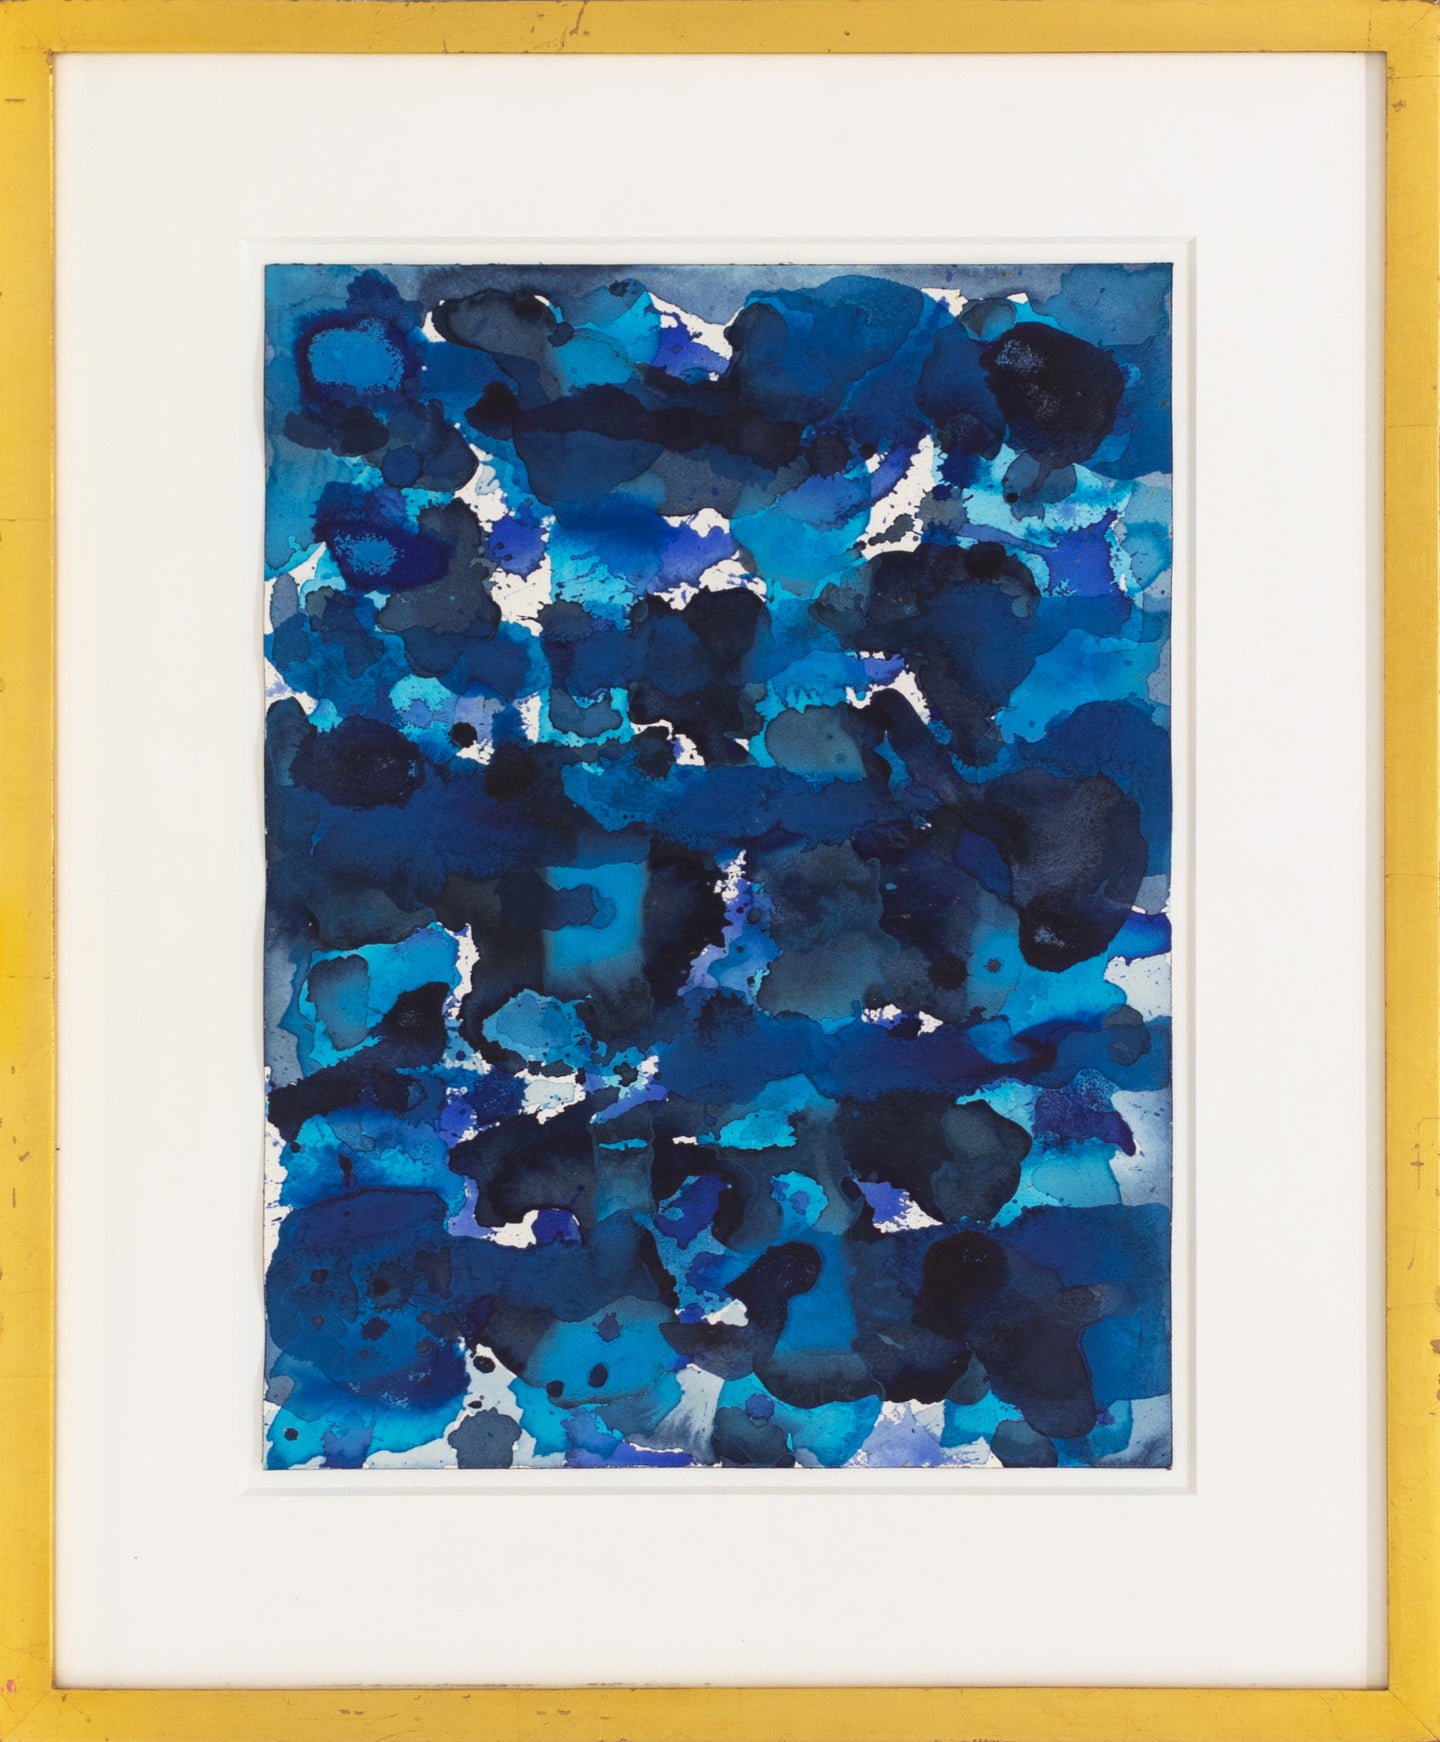 Framed:J. Steven Manolis (b. 1948-)  Deep Pacific Blue, 2007  Watercolor on Arches paper  12 x 16 inches Framed: 23.25 x 19.25   J. Steven Manolis, is an American abstract expressionist artist who paints in both watercolors and acrylics on canvas. He studied for 30 years under the tutelage of world renown colorist and former student of Hans Hofman, Wolf Kahn (1927-2020).   This is a  beautiful seascape of the California ocean.